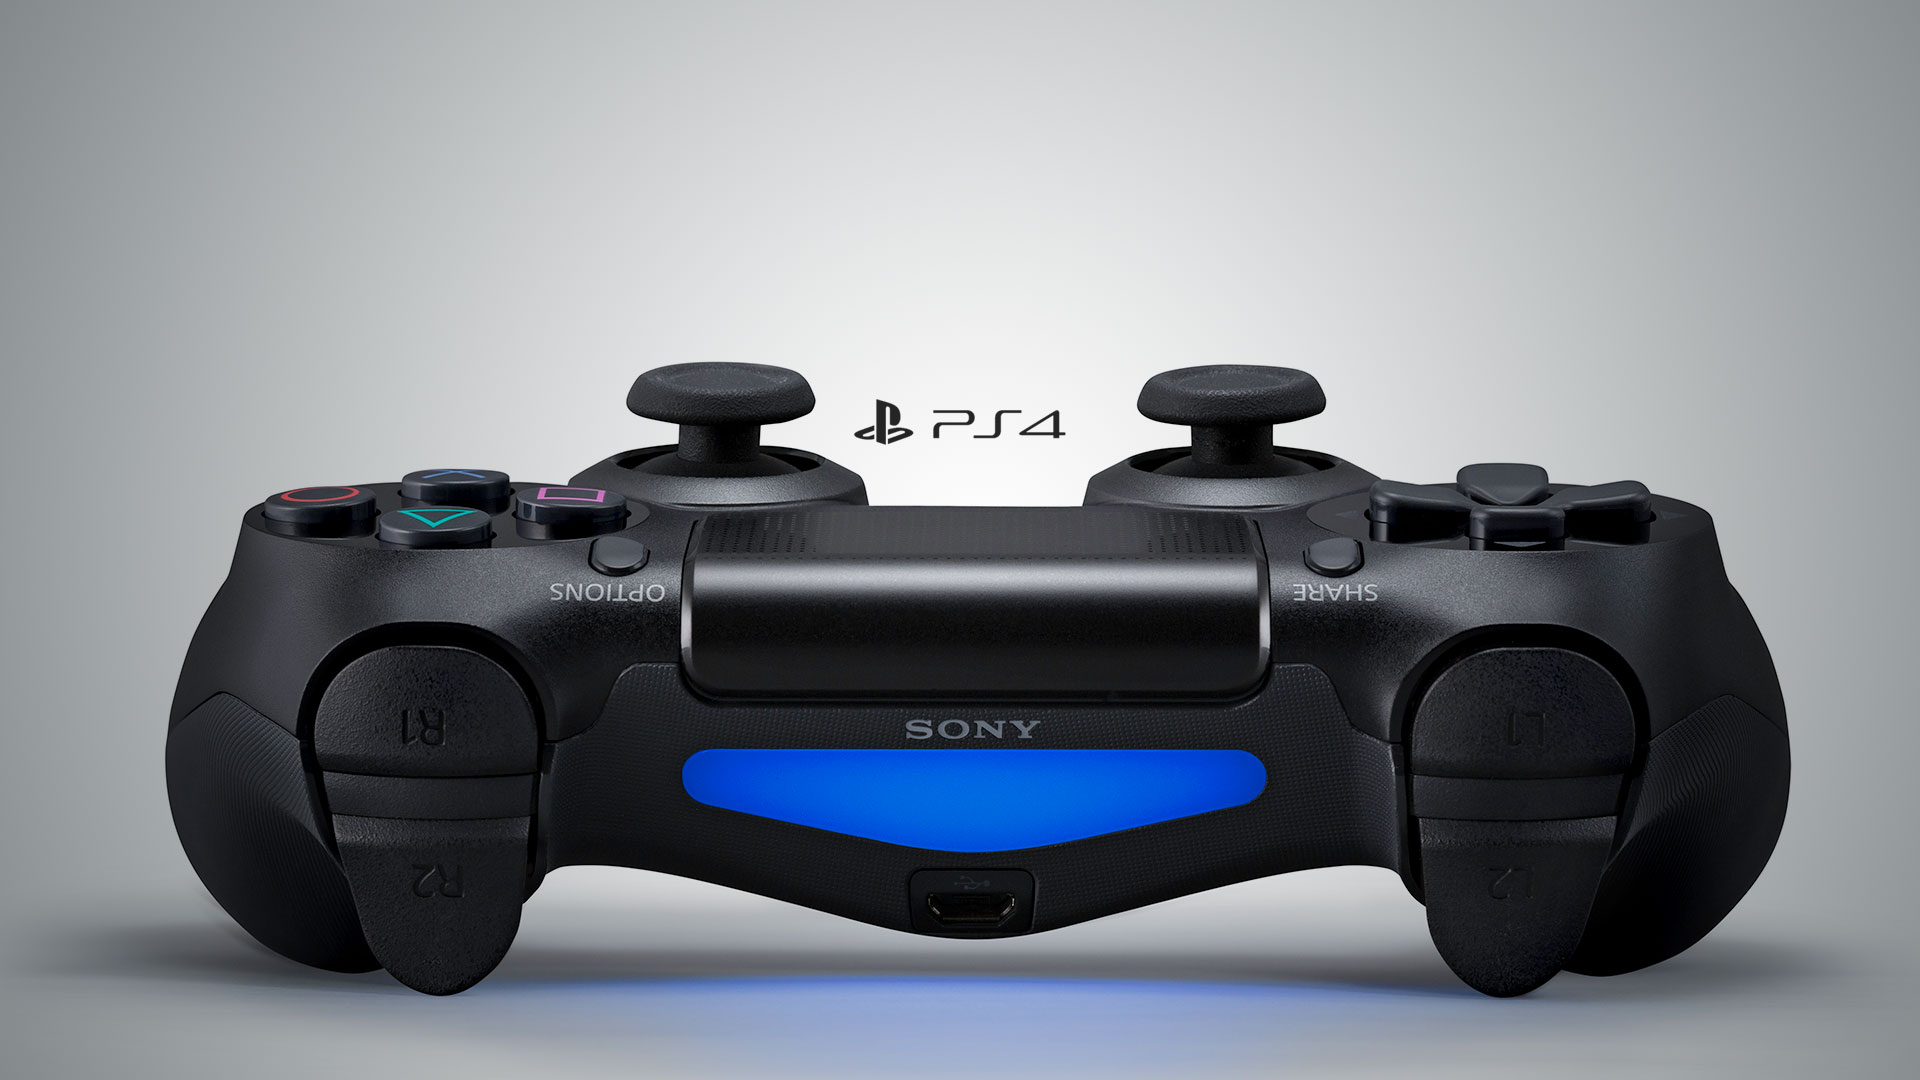 Related Playstation Buttons Wallpaper HD